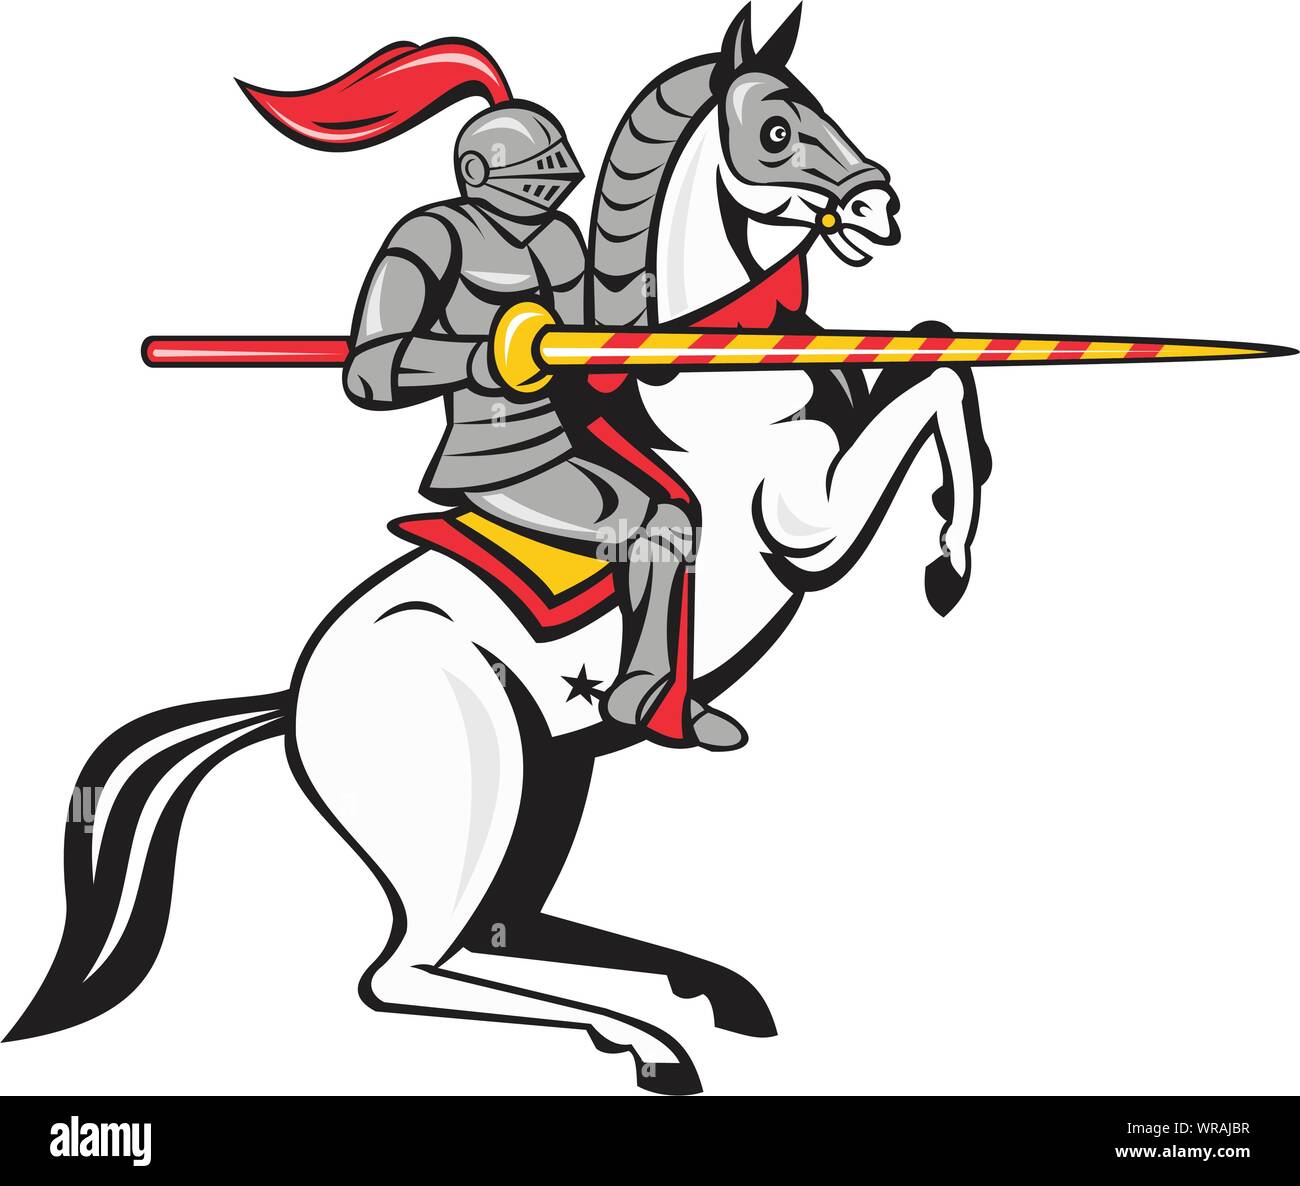 Knight Lance Steed Prancing Isolated Cartoon Stock Vector